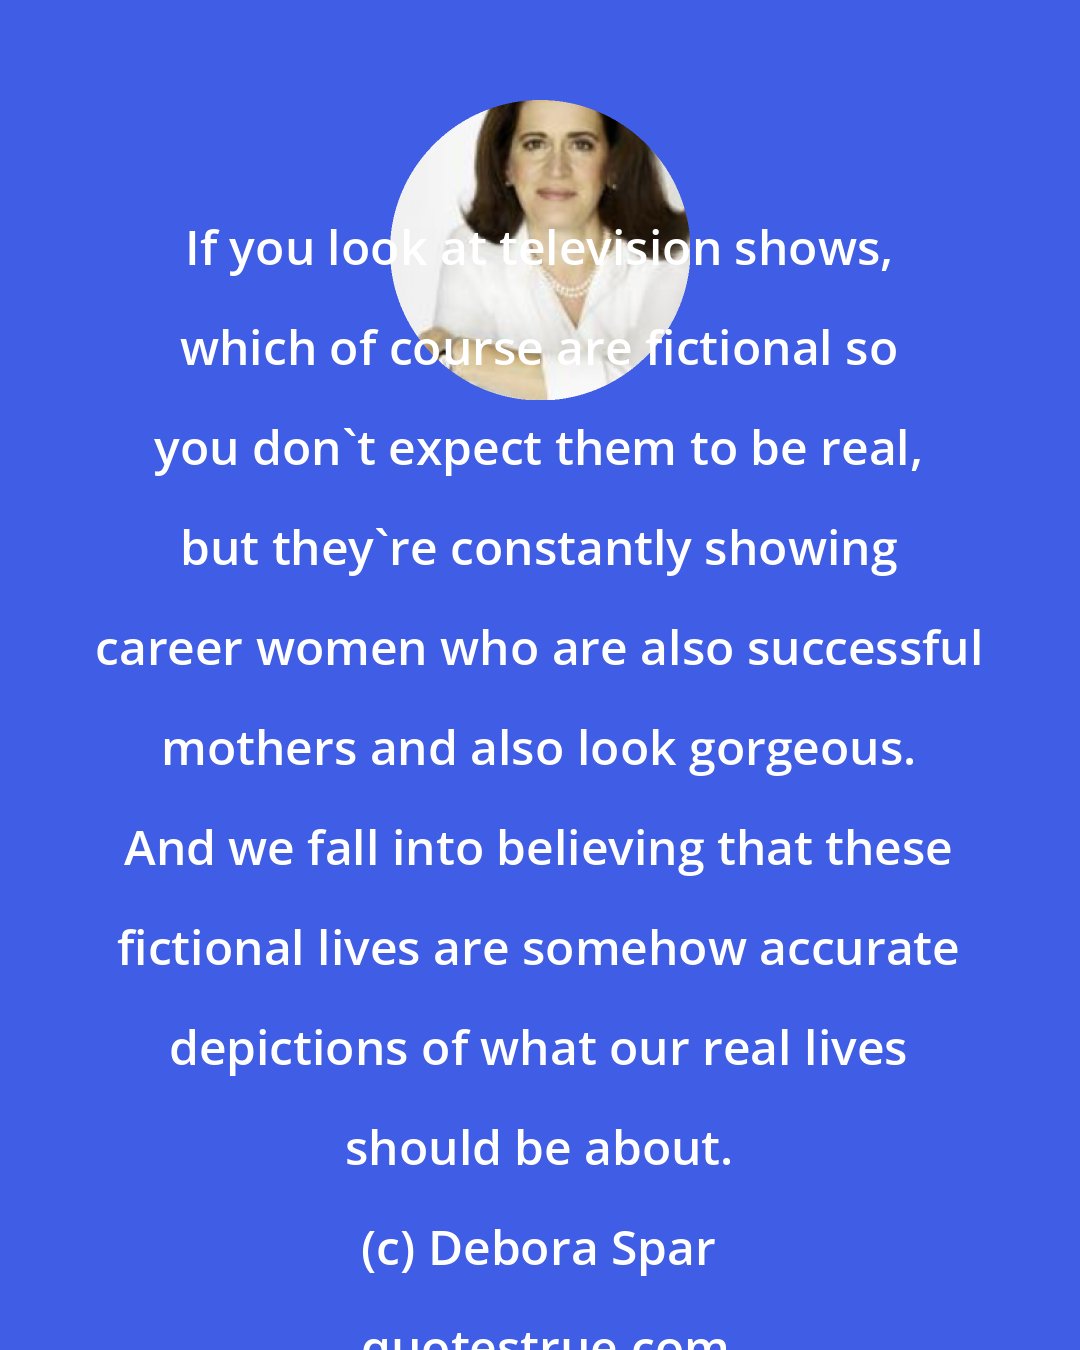 Debora Spar: If you look at television shows, which of course are fictional so you don't expect them to be real, but they're constantly showing career women who are also successful mothers and also look gorgeous. And we fall into believing that these fictional lives are somehow accurate depictions of what our real lives should be about.